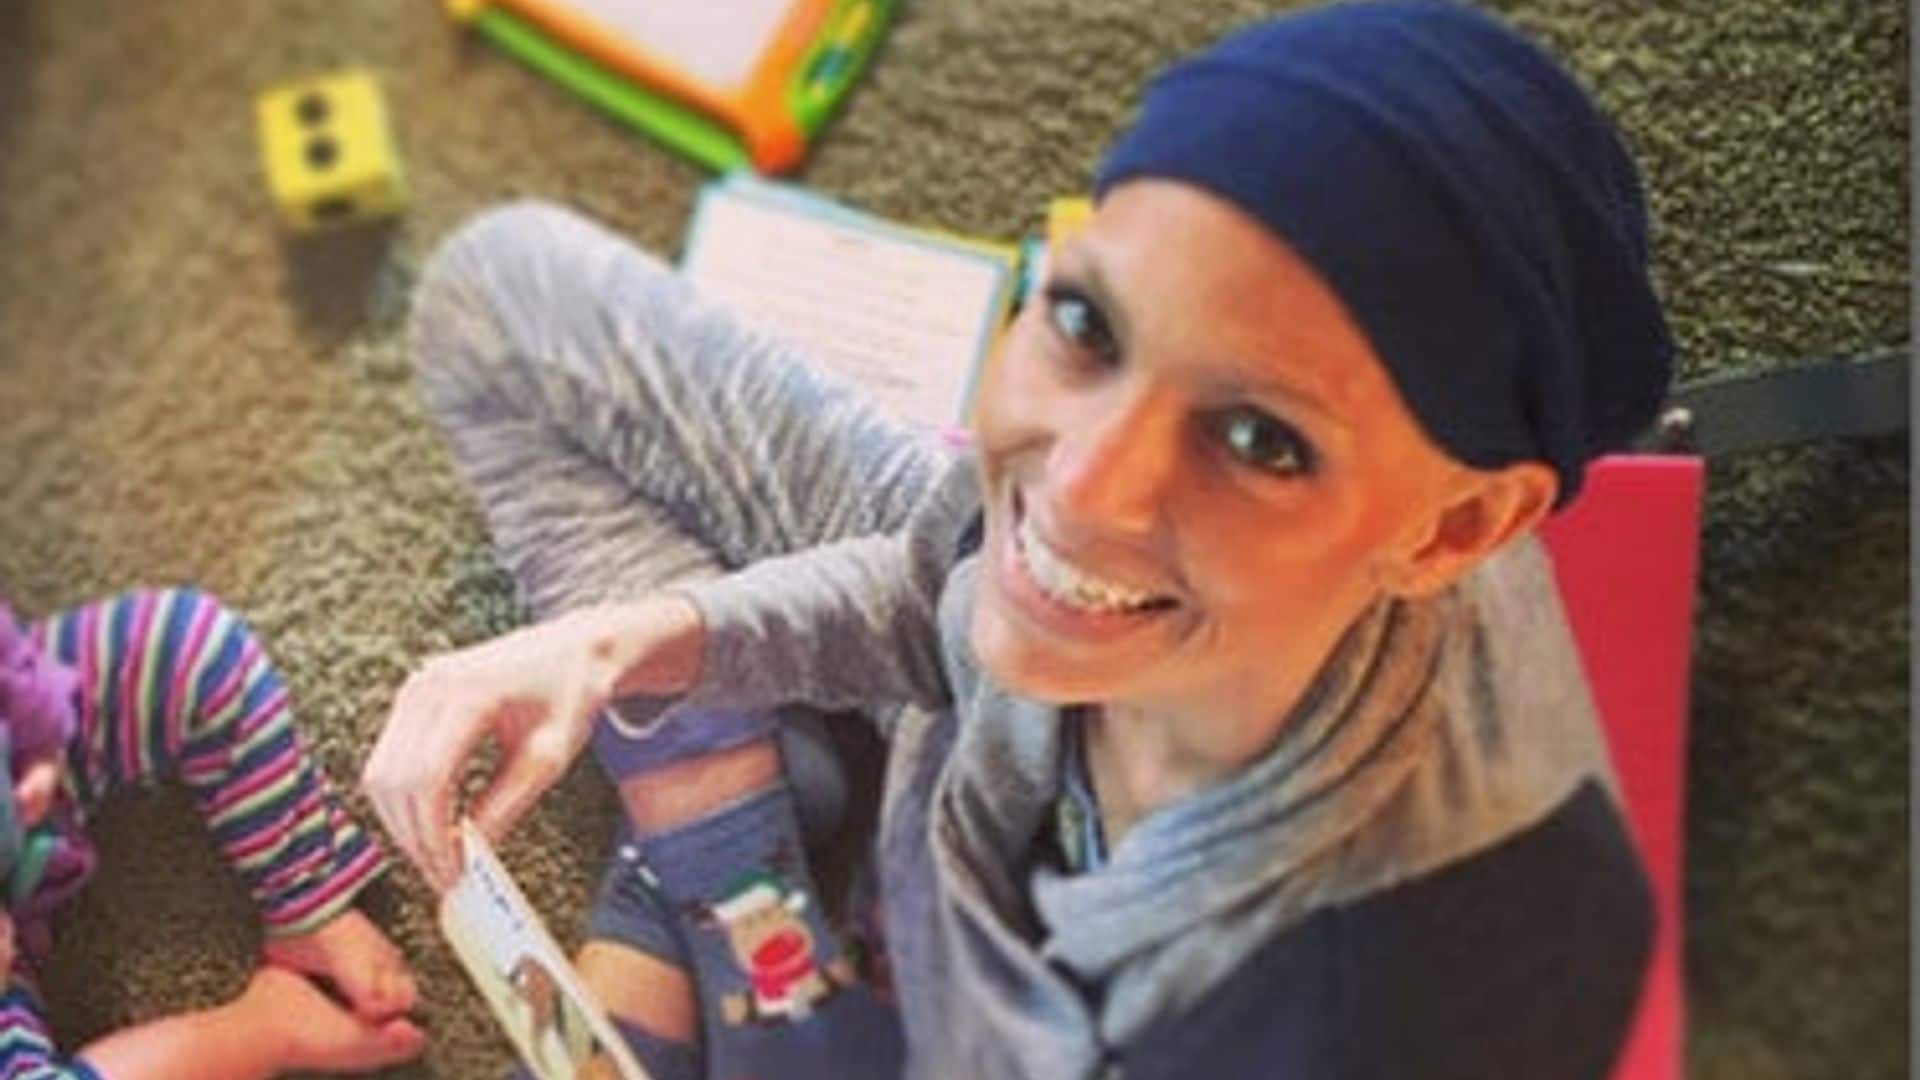 Joey Feek shows strength as she is 'out of bed' playing with daughter Indiana